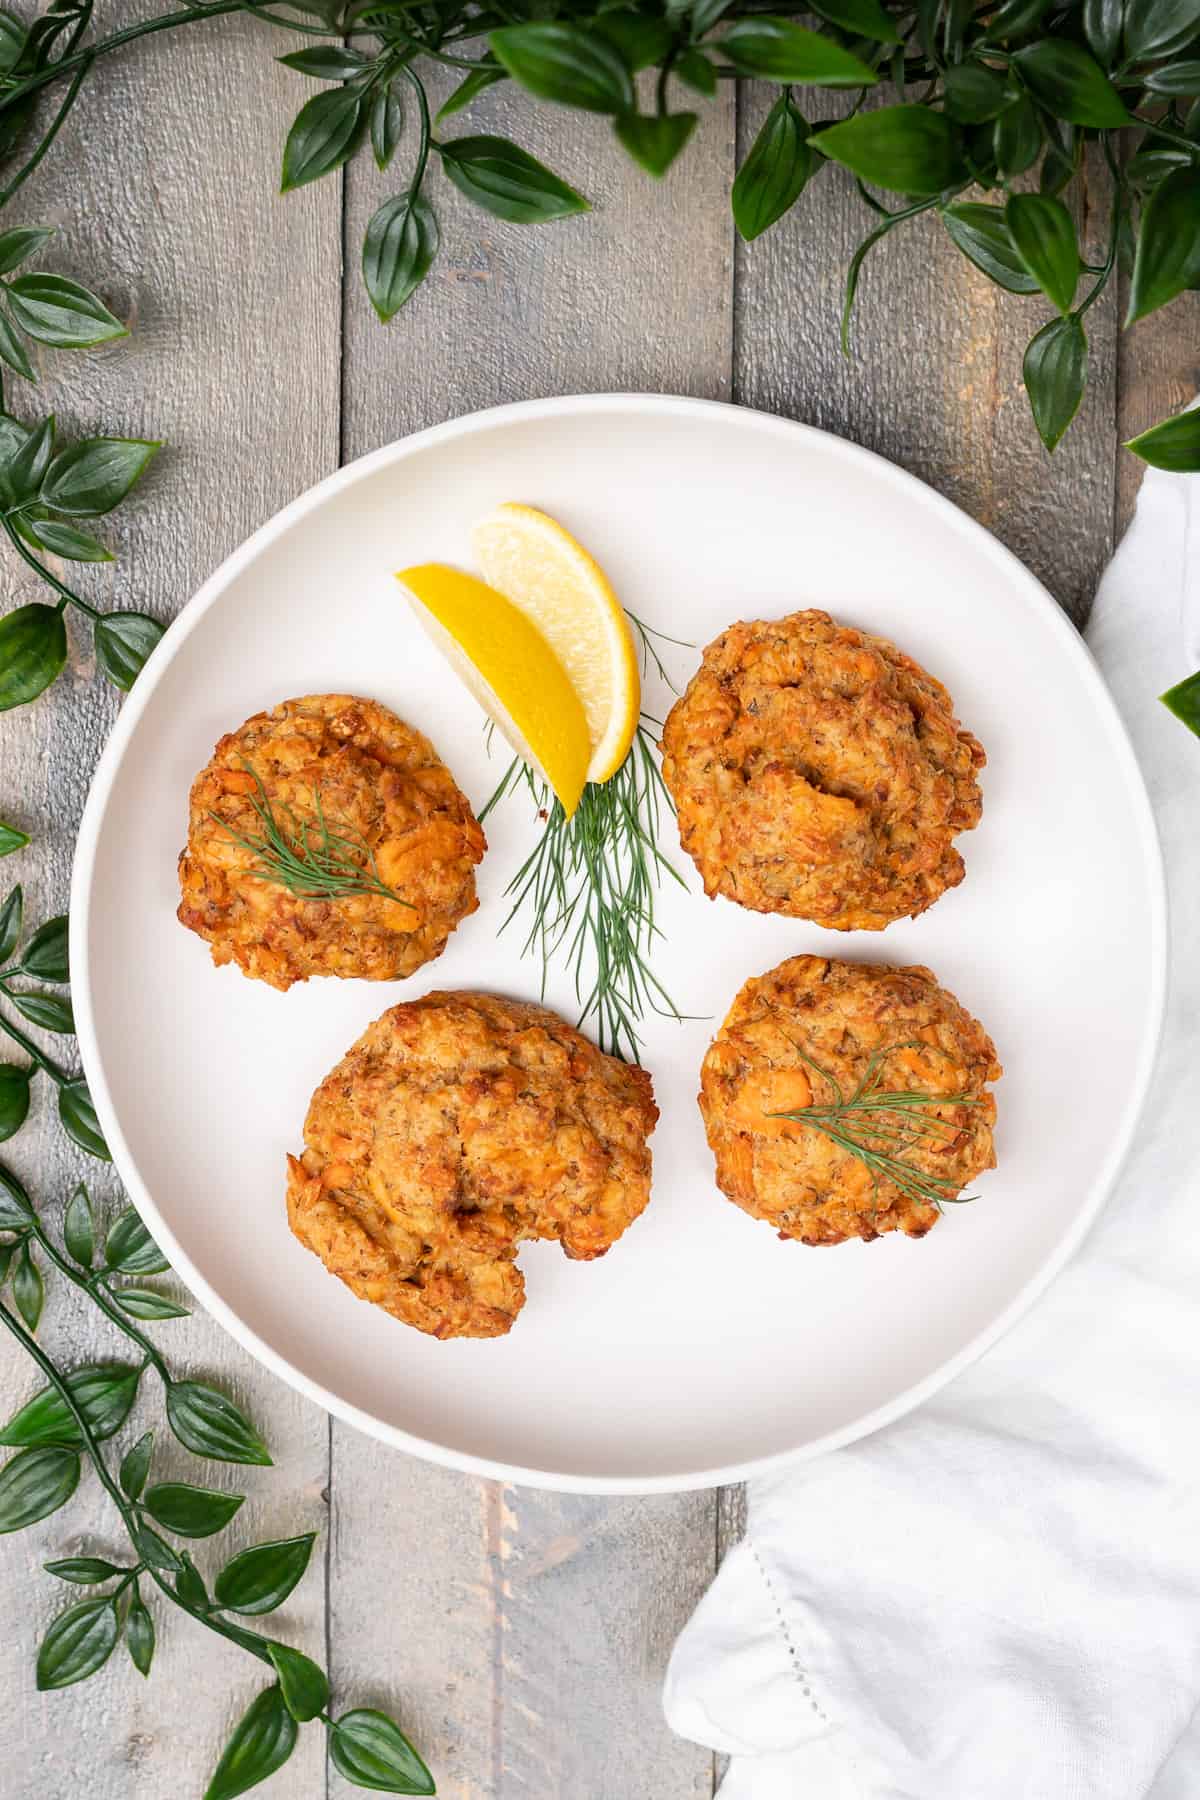 Four baked salmon cakes on a plate garnished with fresh dill and lemon.